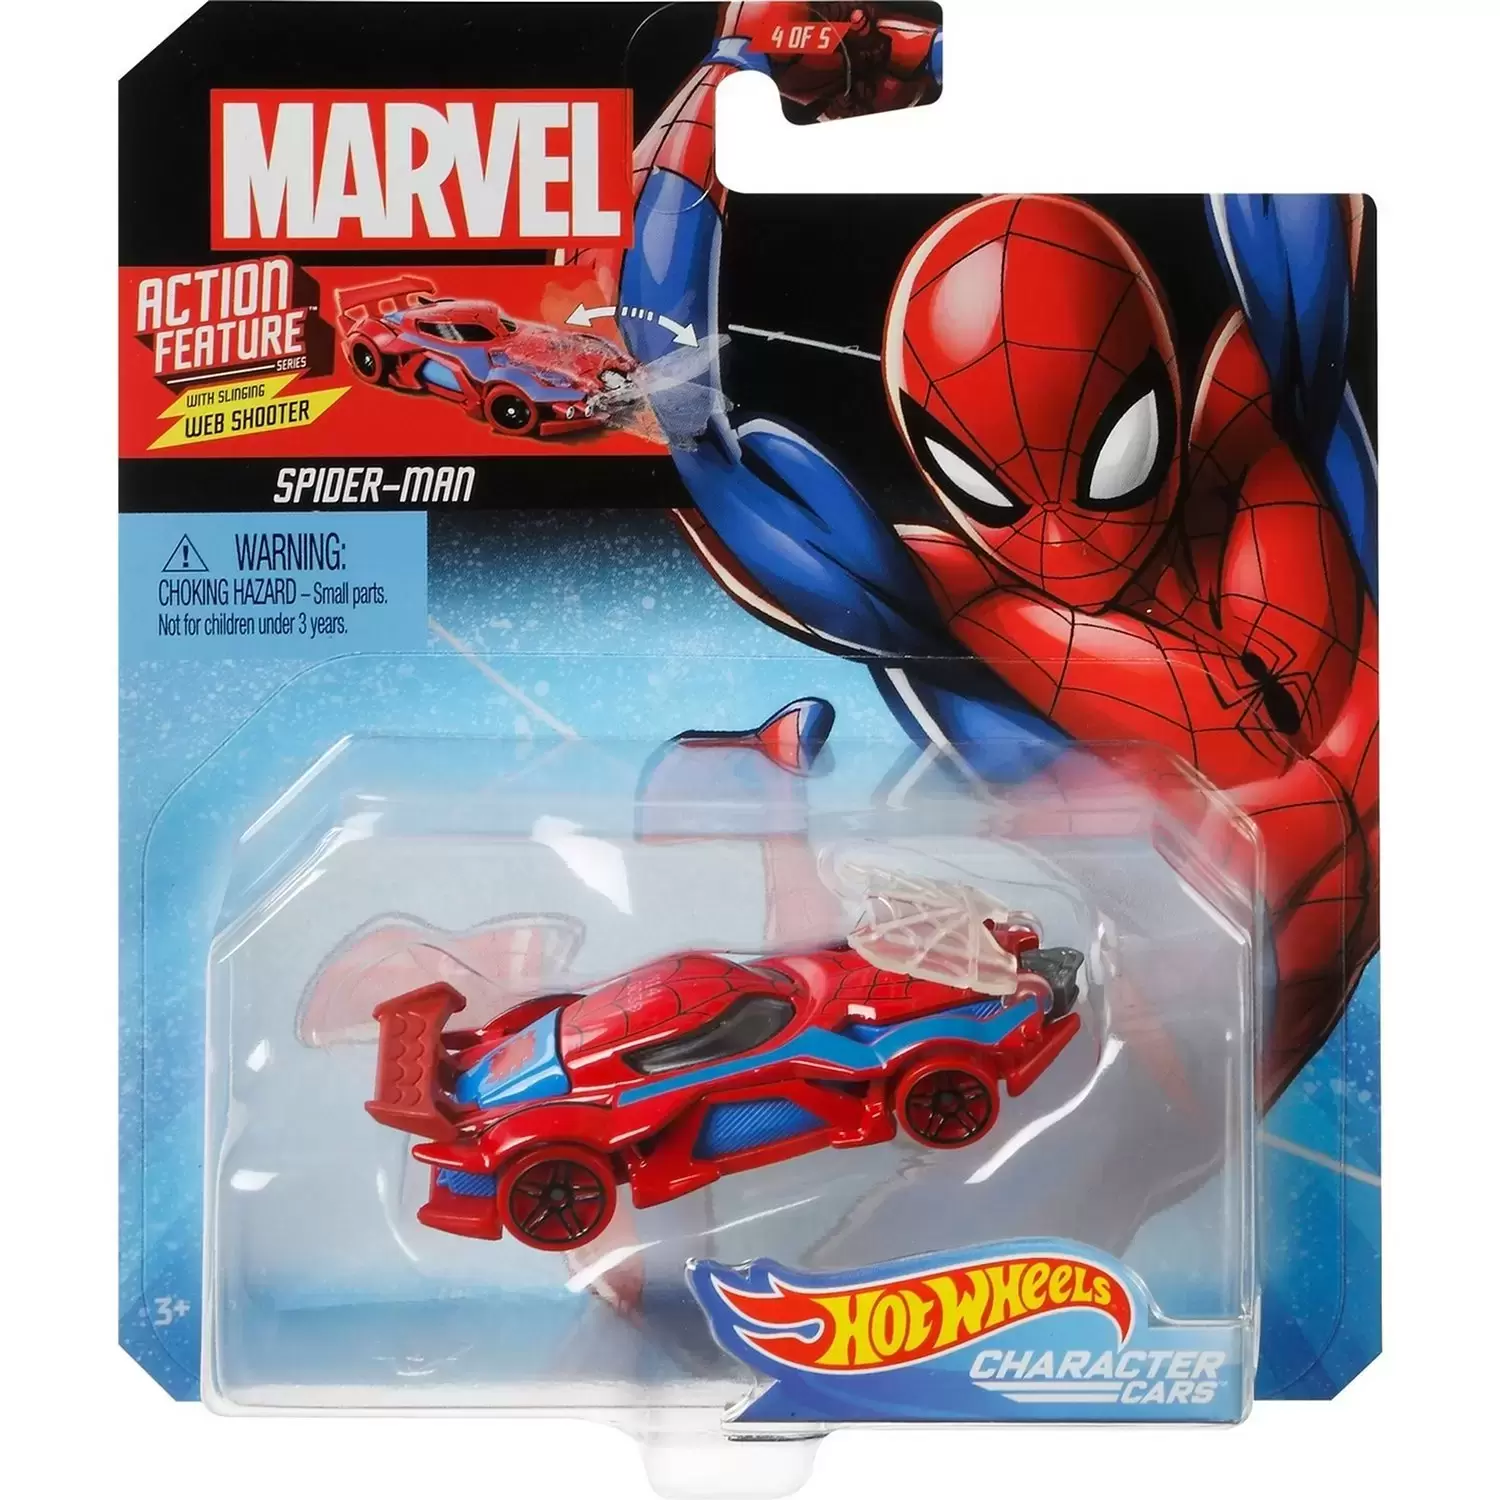 Marvel Character Cars - Action Feature Series - Spider-Man